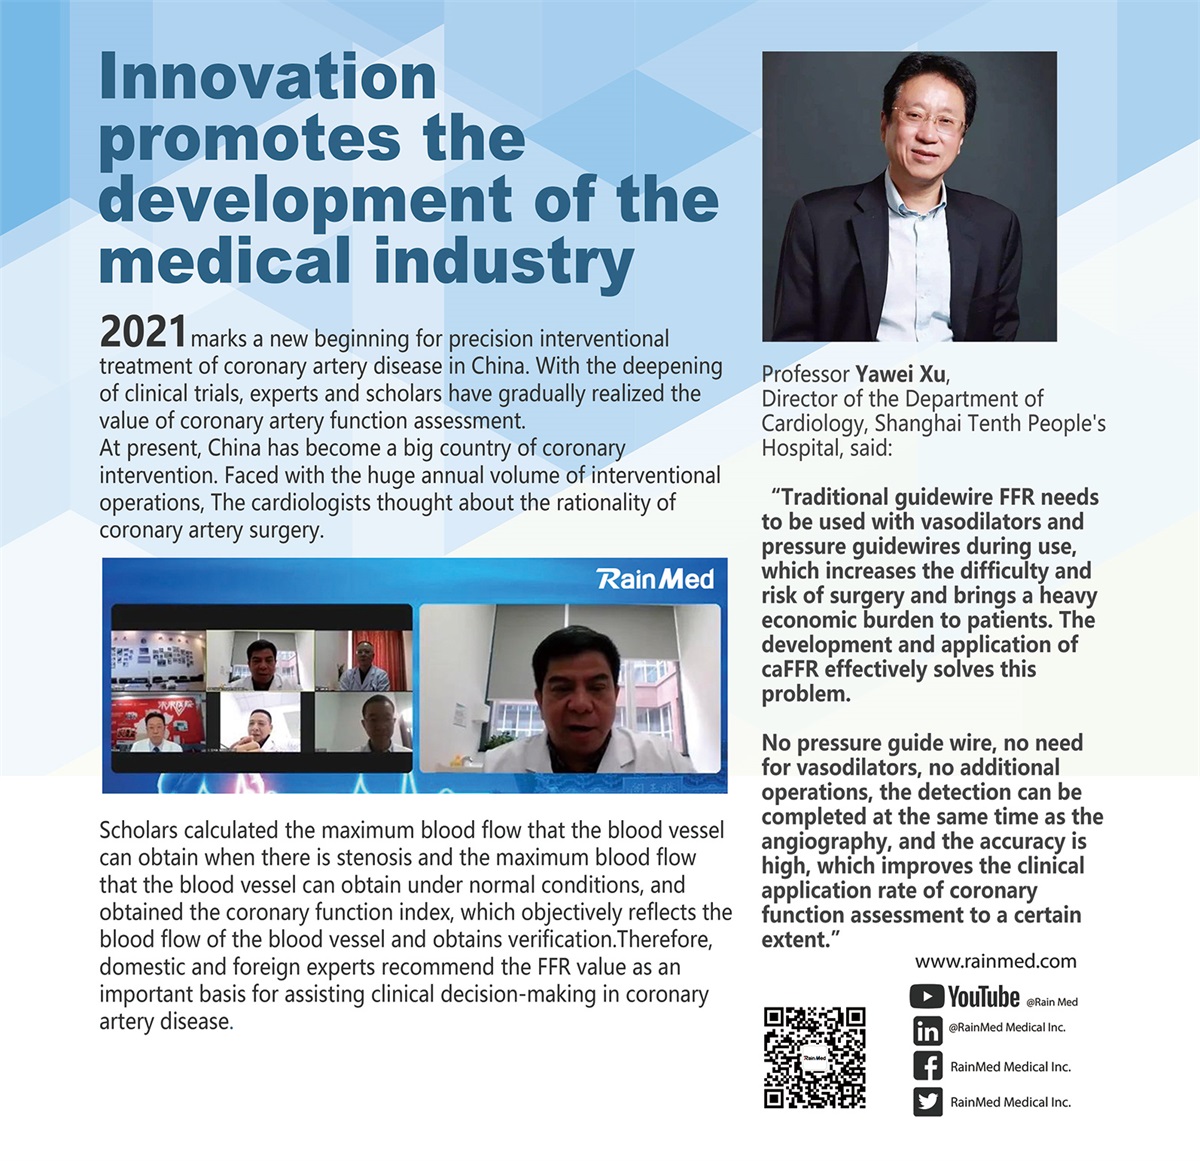 Innovation promotes the development of the medical industry